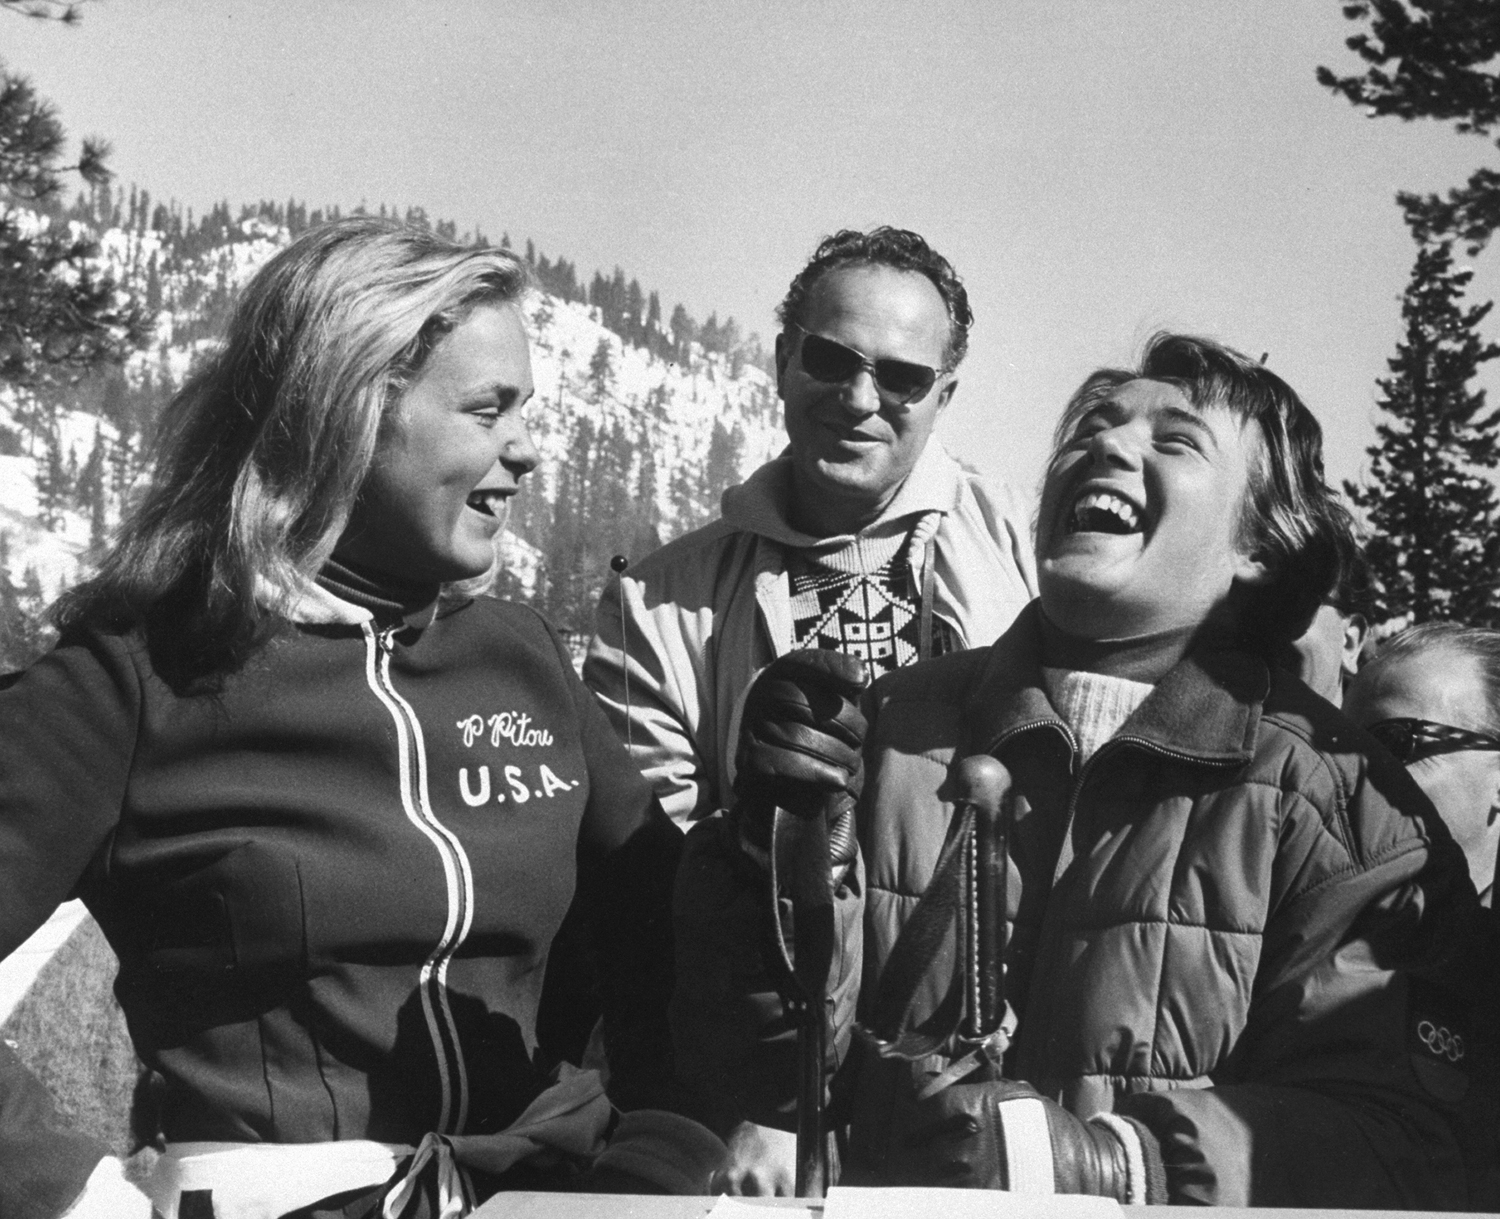 American silver medalist Penny Pitou (left) and German downhill gold medalist Heidi Biebl, Squaw Valley, 1960.